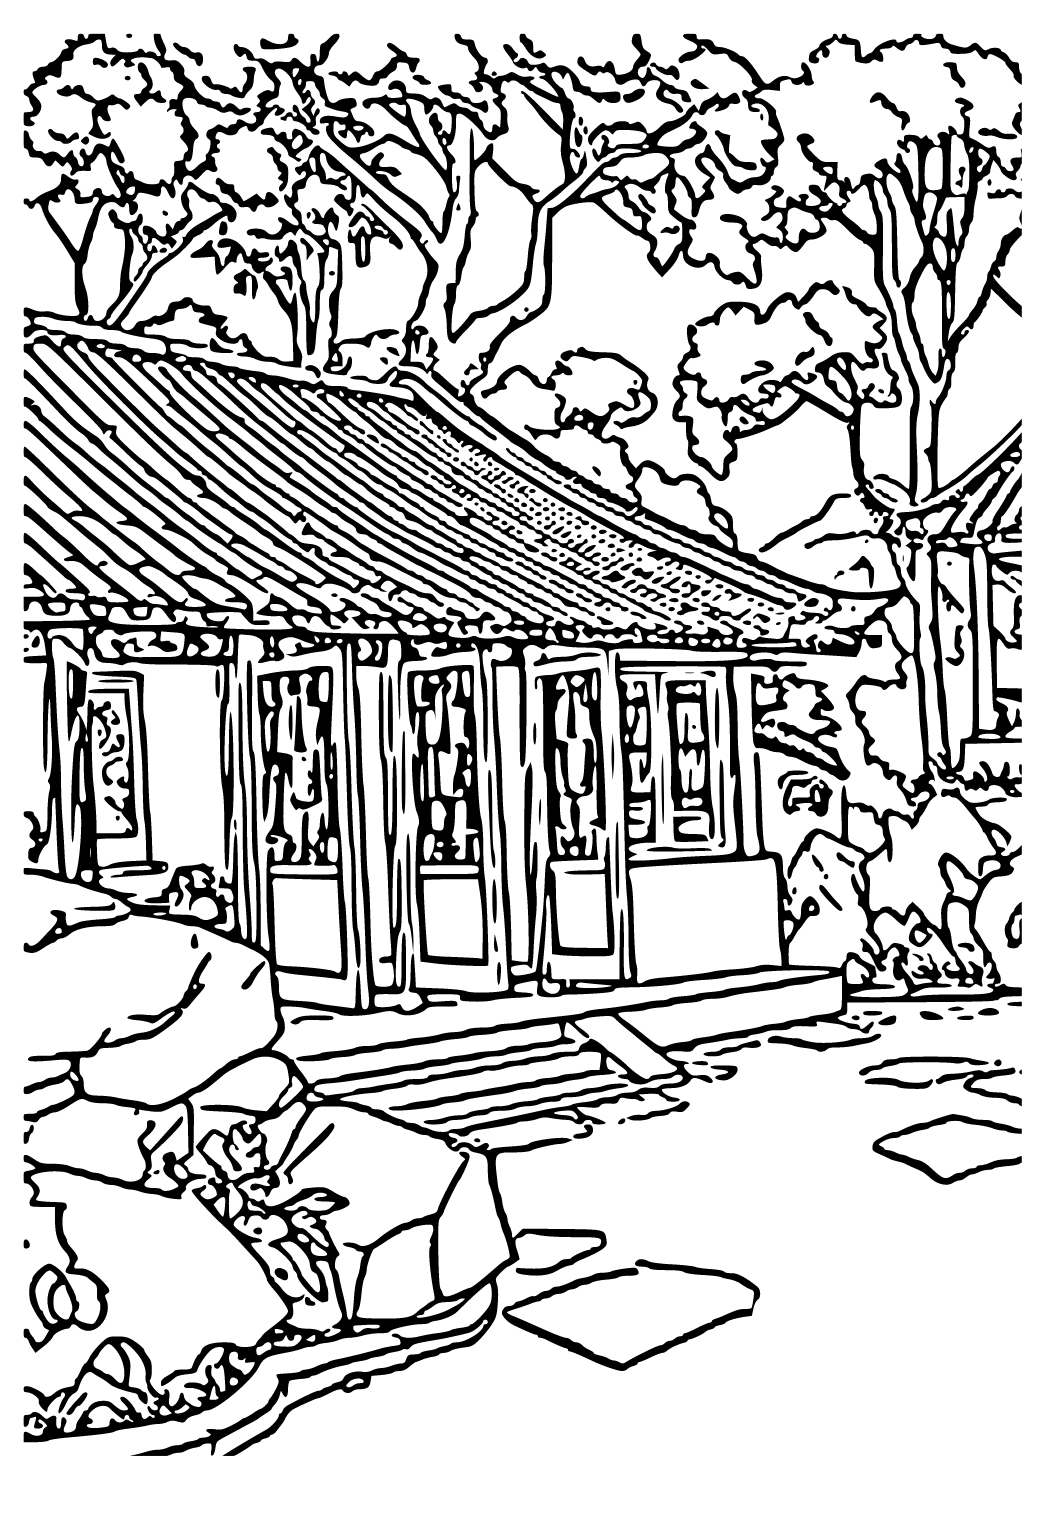 Share more than 69 scenery sketch for kids best - seven.edu.vn